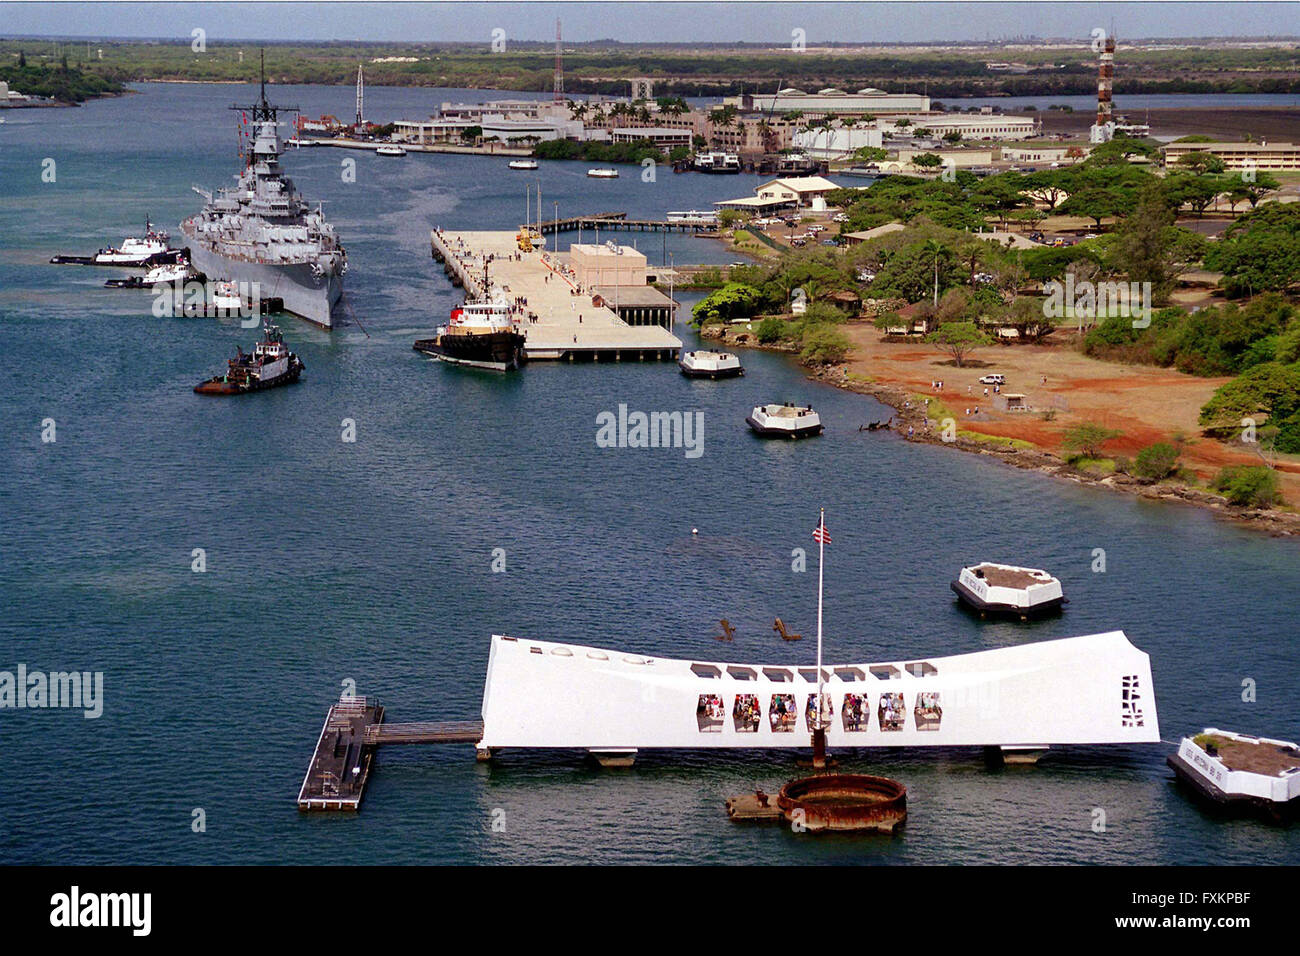 June 22, 1998 - Pearl Harbor, Hawaii, United States of America - Tug boats push the battleship USS Missouri (BB 63) to its new berth at Ford Island, on June 22, 1998, as it joins the USS Arizona Memorial (foreground) in Pearl Harbor, Hawaii. United States Secretary of the Navy John H. Dalton signed the Donation Agreement on May 4th, allowing Missouri to be used as a museum near the Arizona Memorial as symbols of the beginning and the end of World War II. The Missouri was towed 2,600-miles across the Pacific Ocean from Bremerton, Washington. Mandatory Credit: Kerry E. Baker/U.S. Stock Photo